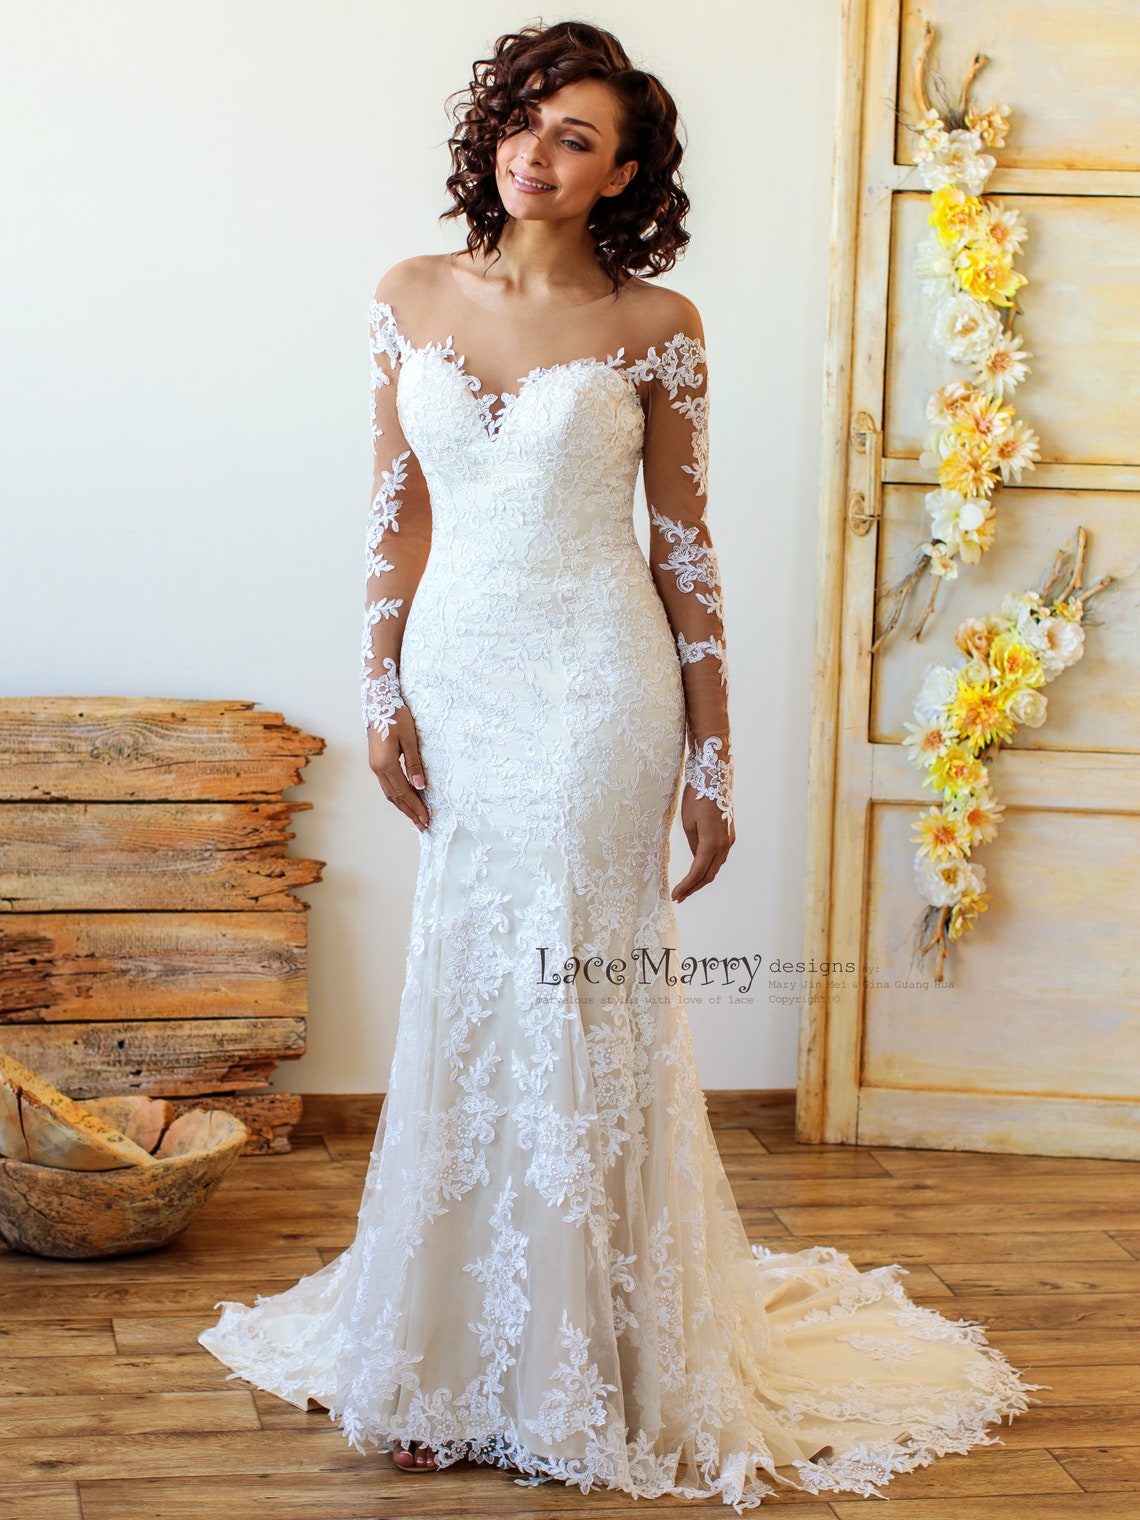 Exquisite Long Lace Sleeves Design Wedding Dress with Light image 3